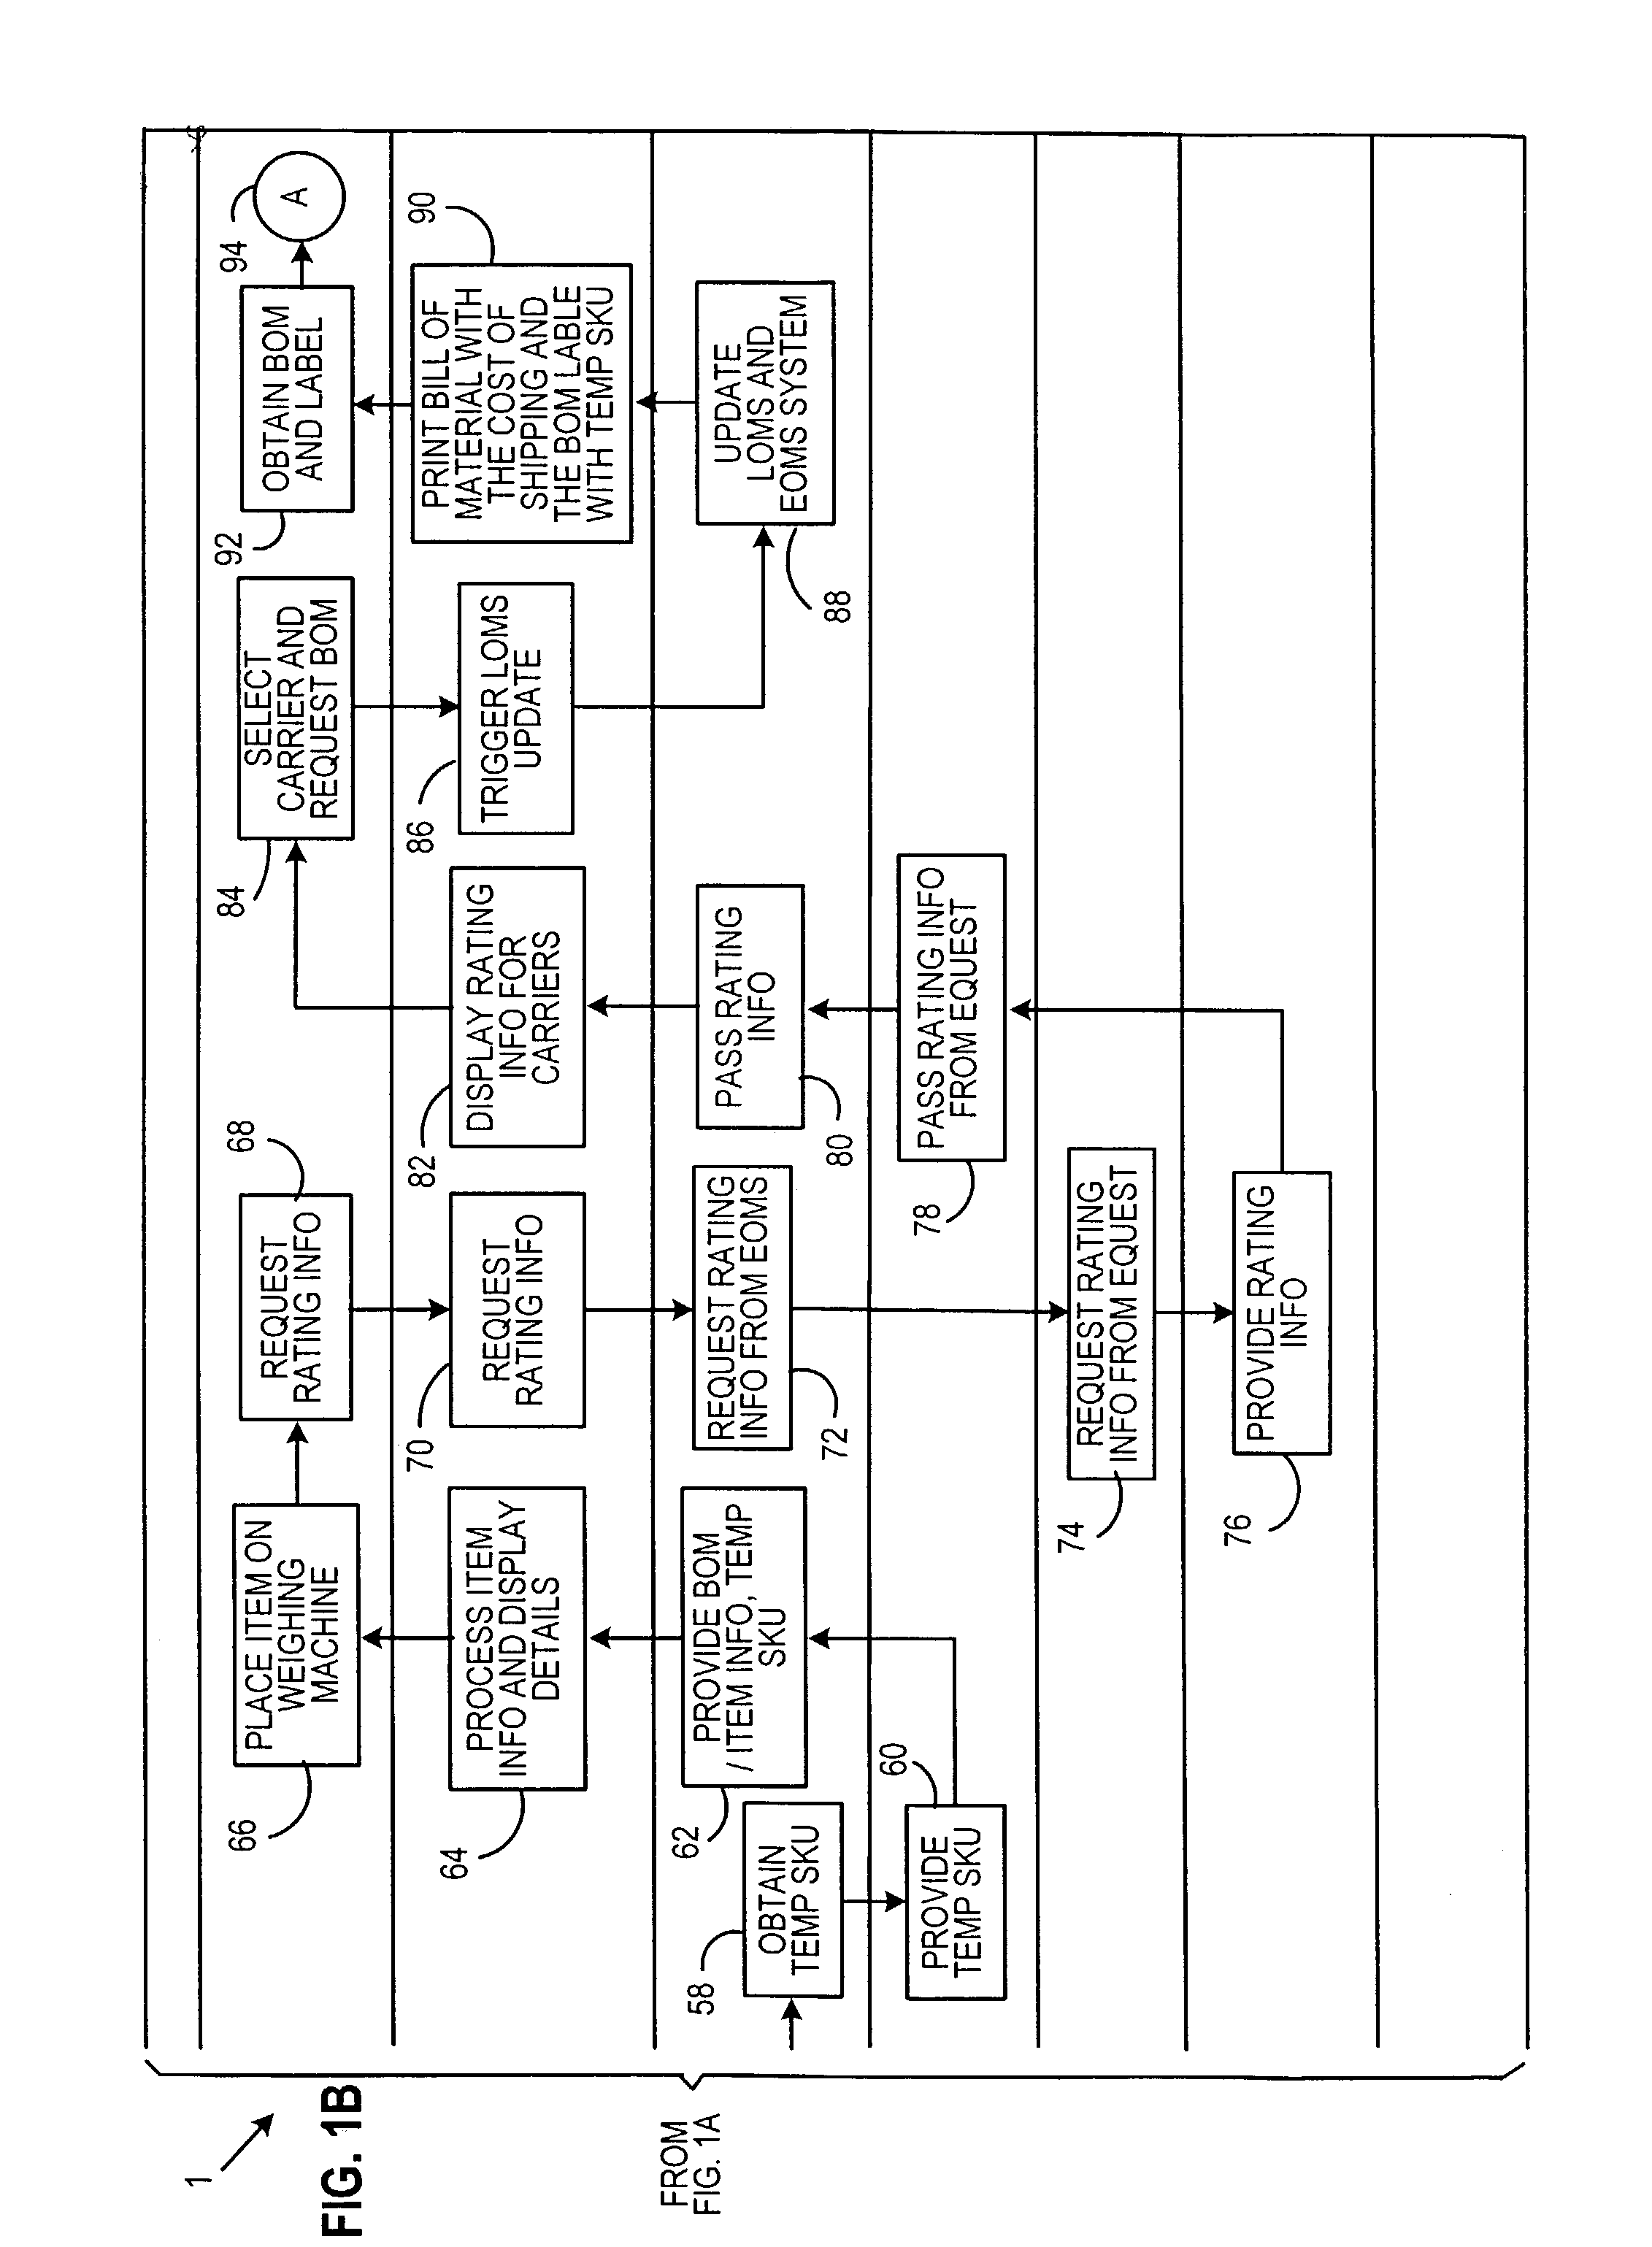 Method and system for enterprise-level unassisted customer shipping